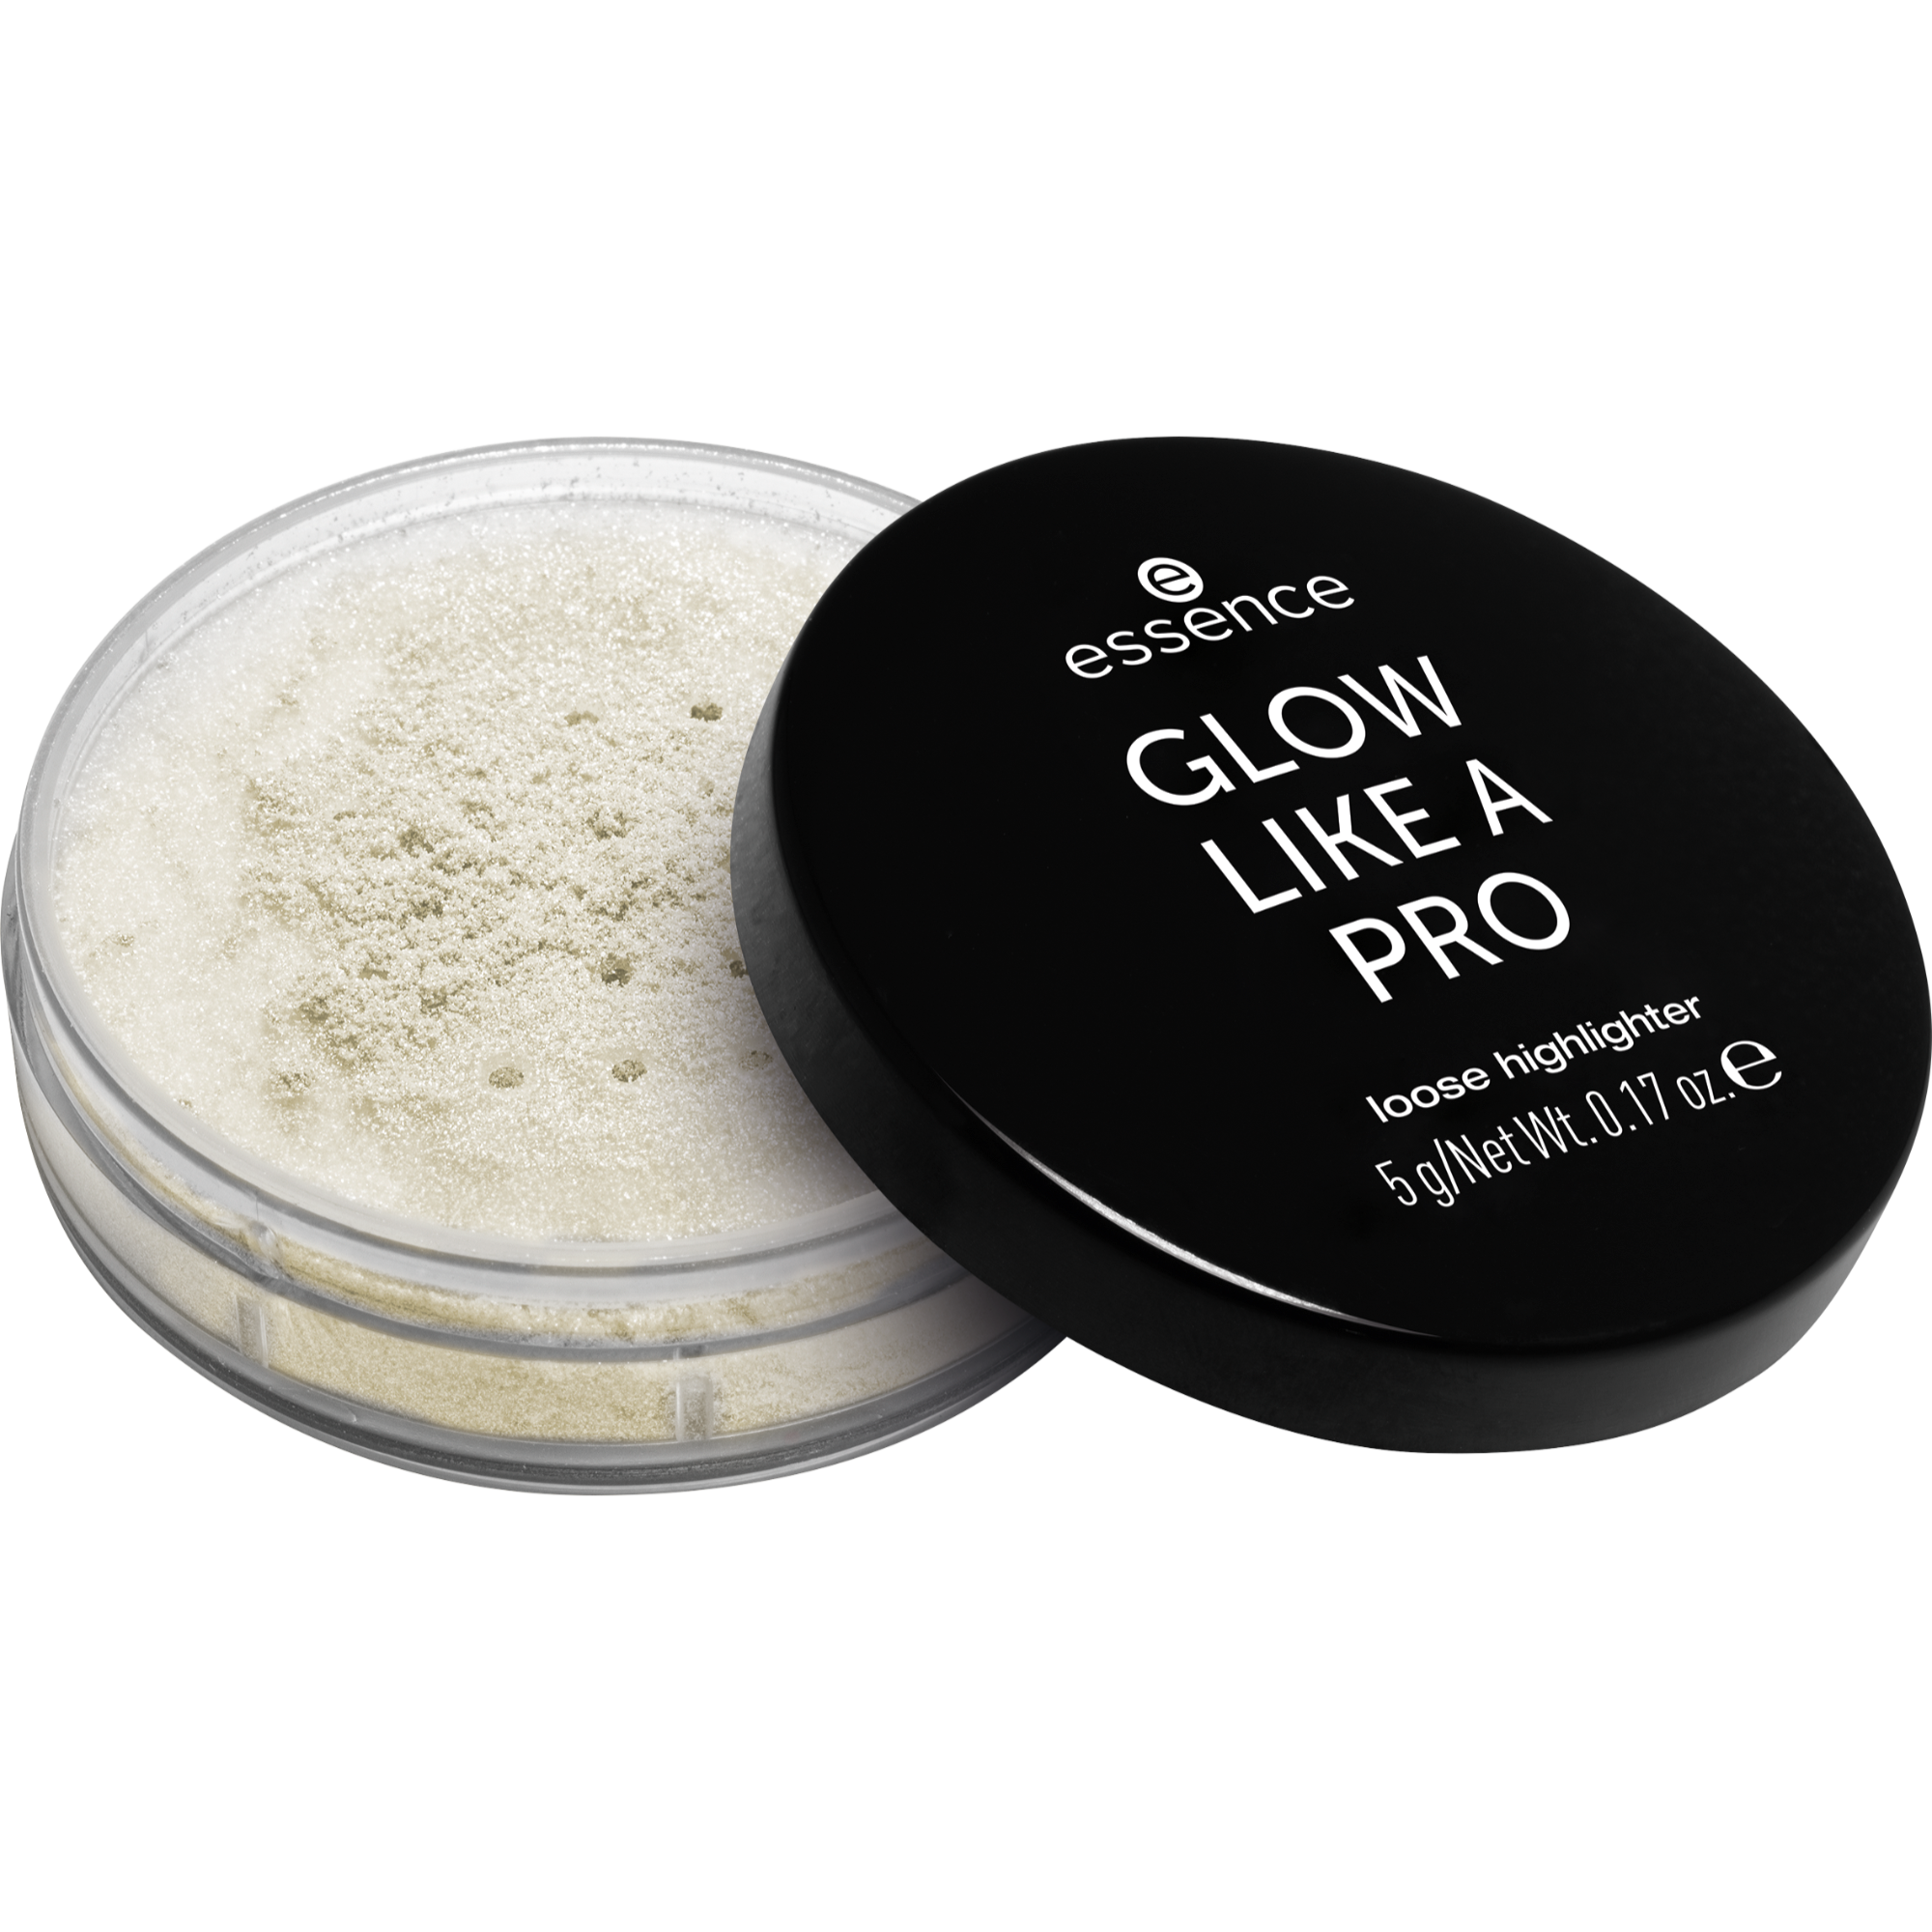 GLOW LIKE A PRO face perfectionist set